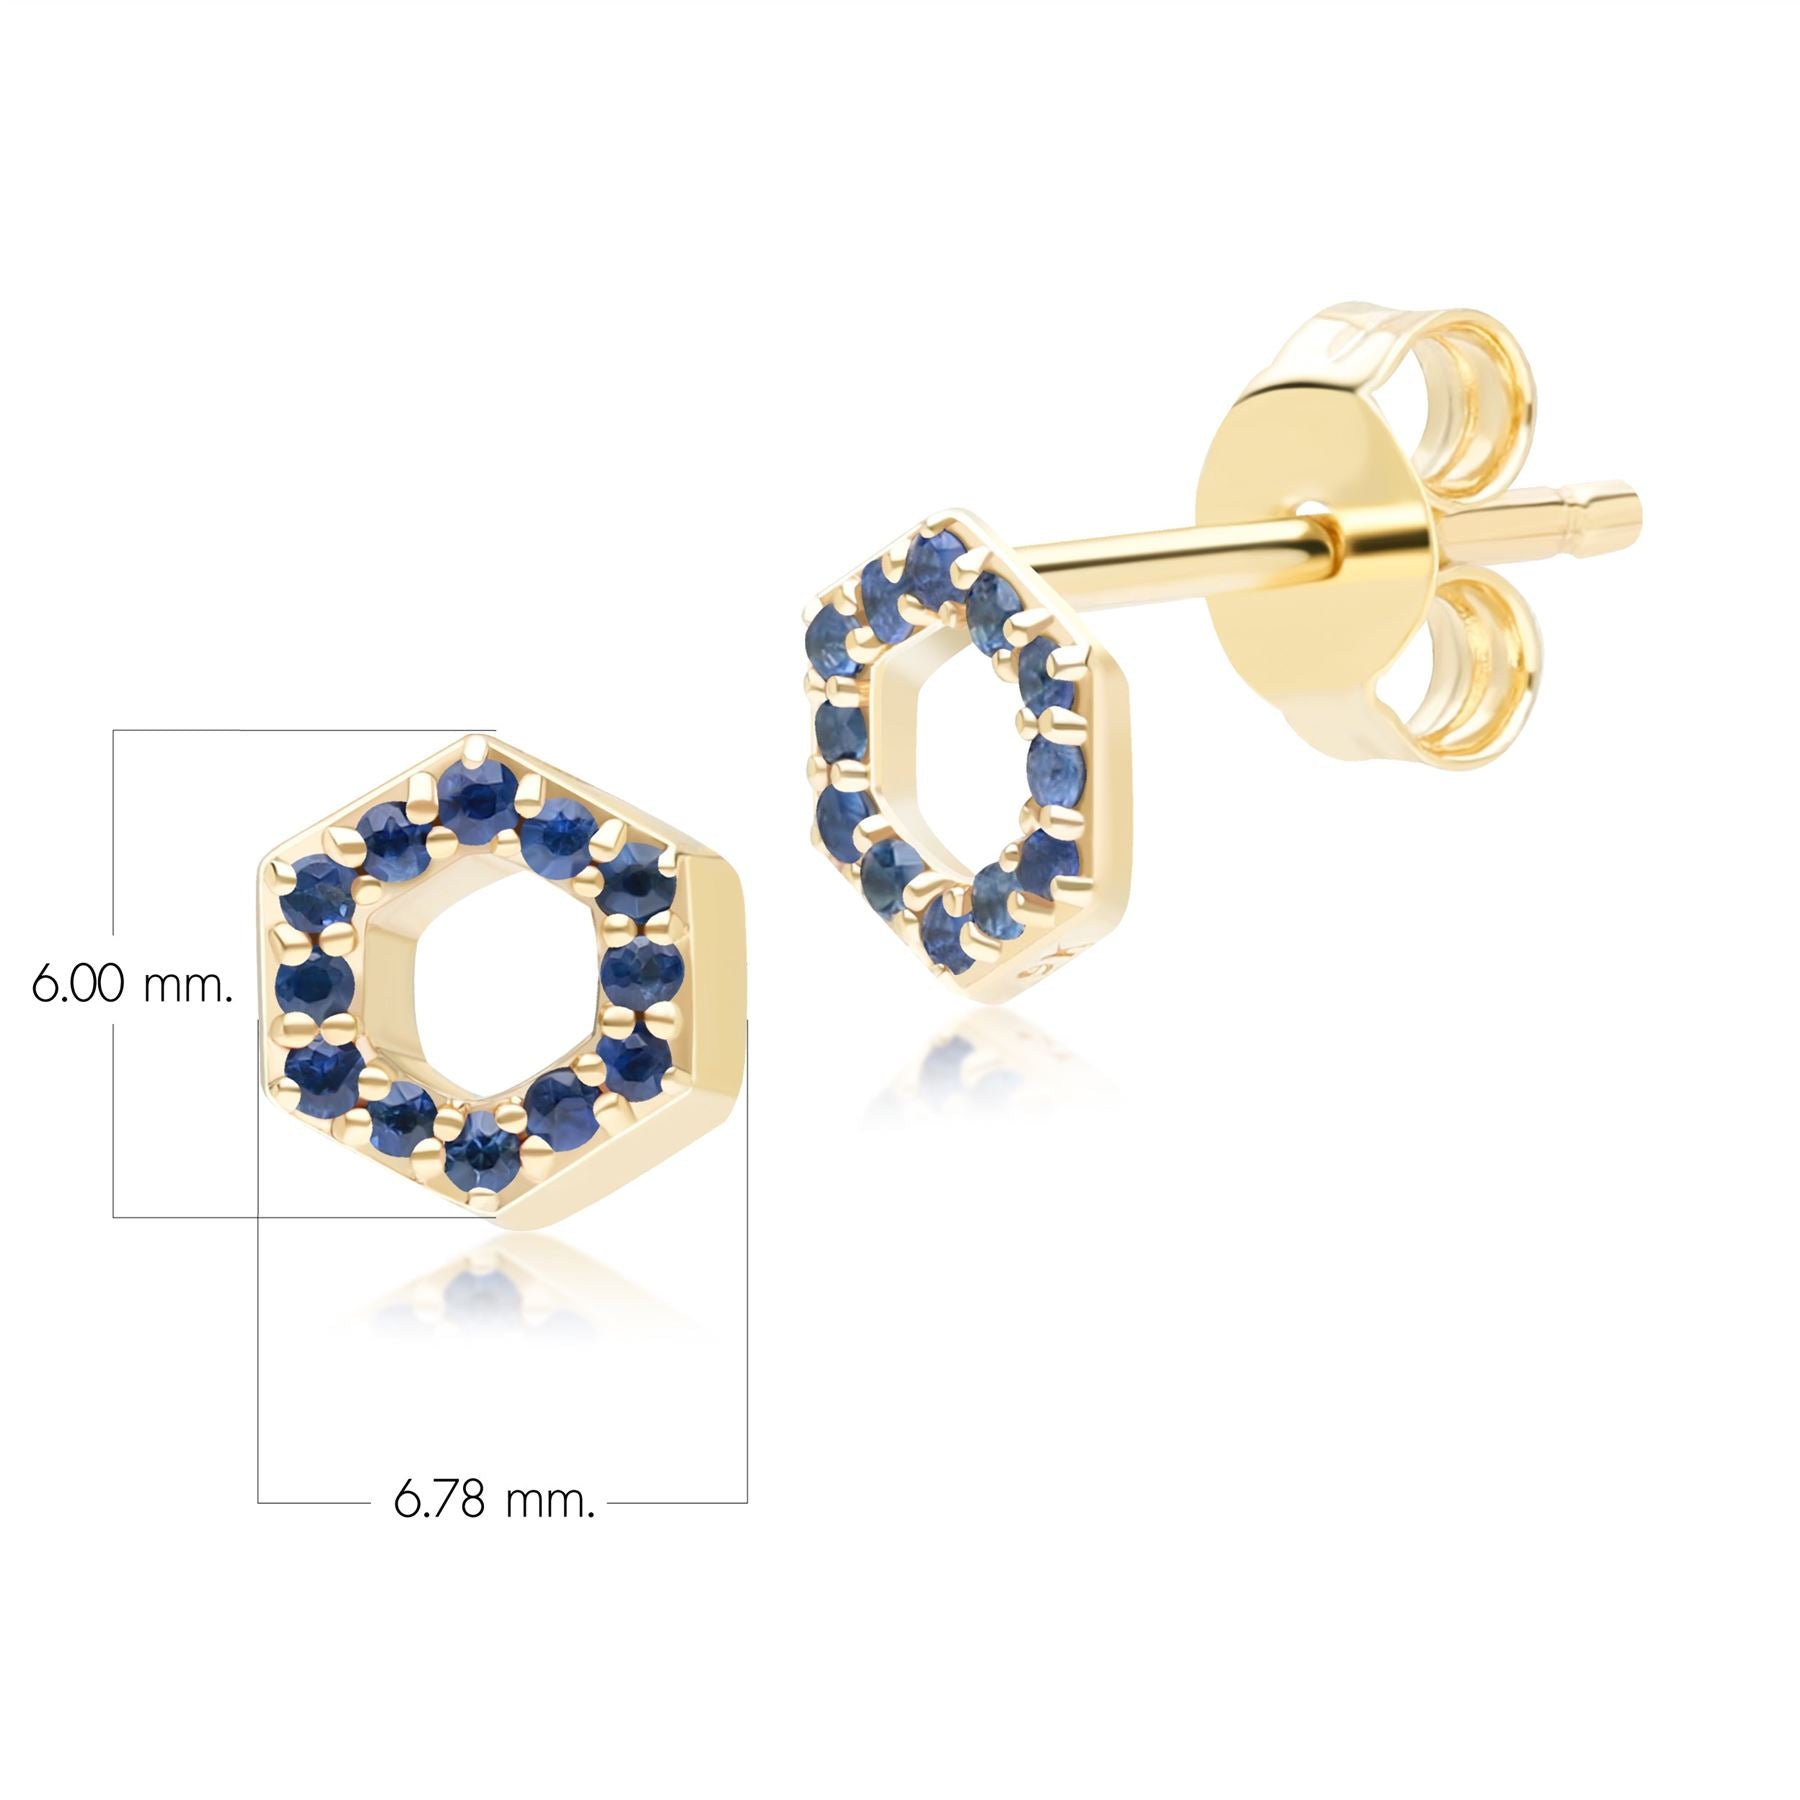 Geometric Hex Sapphire Stud Earrings in 9ct Yellow Gold Dimensions 